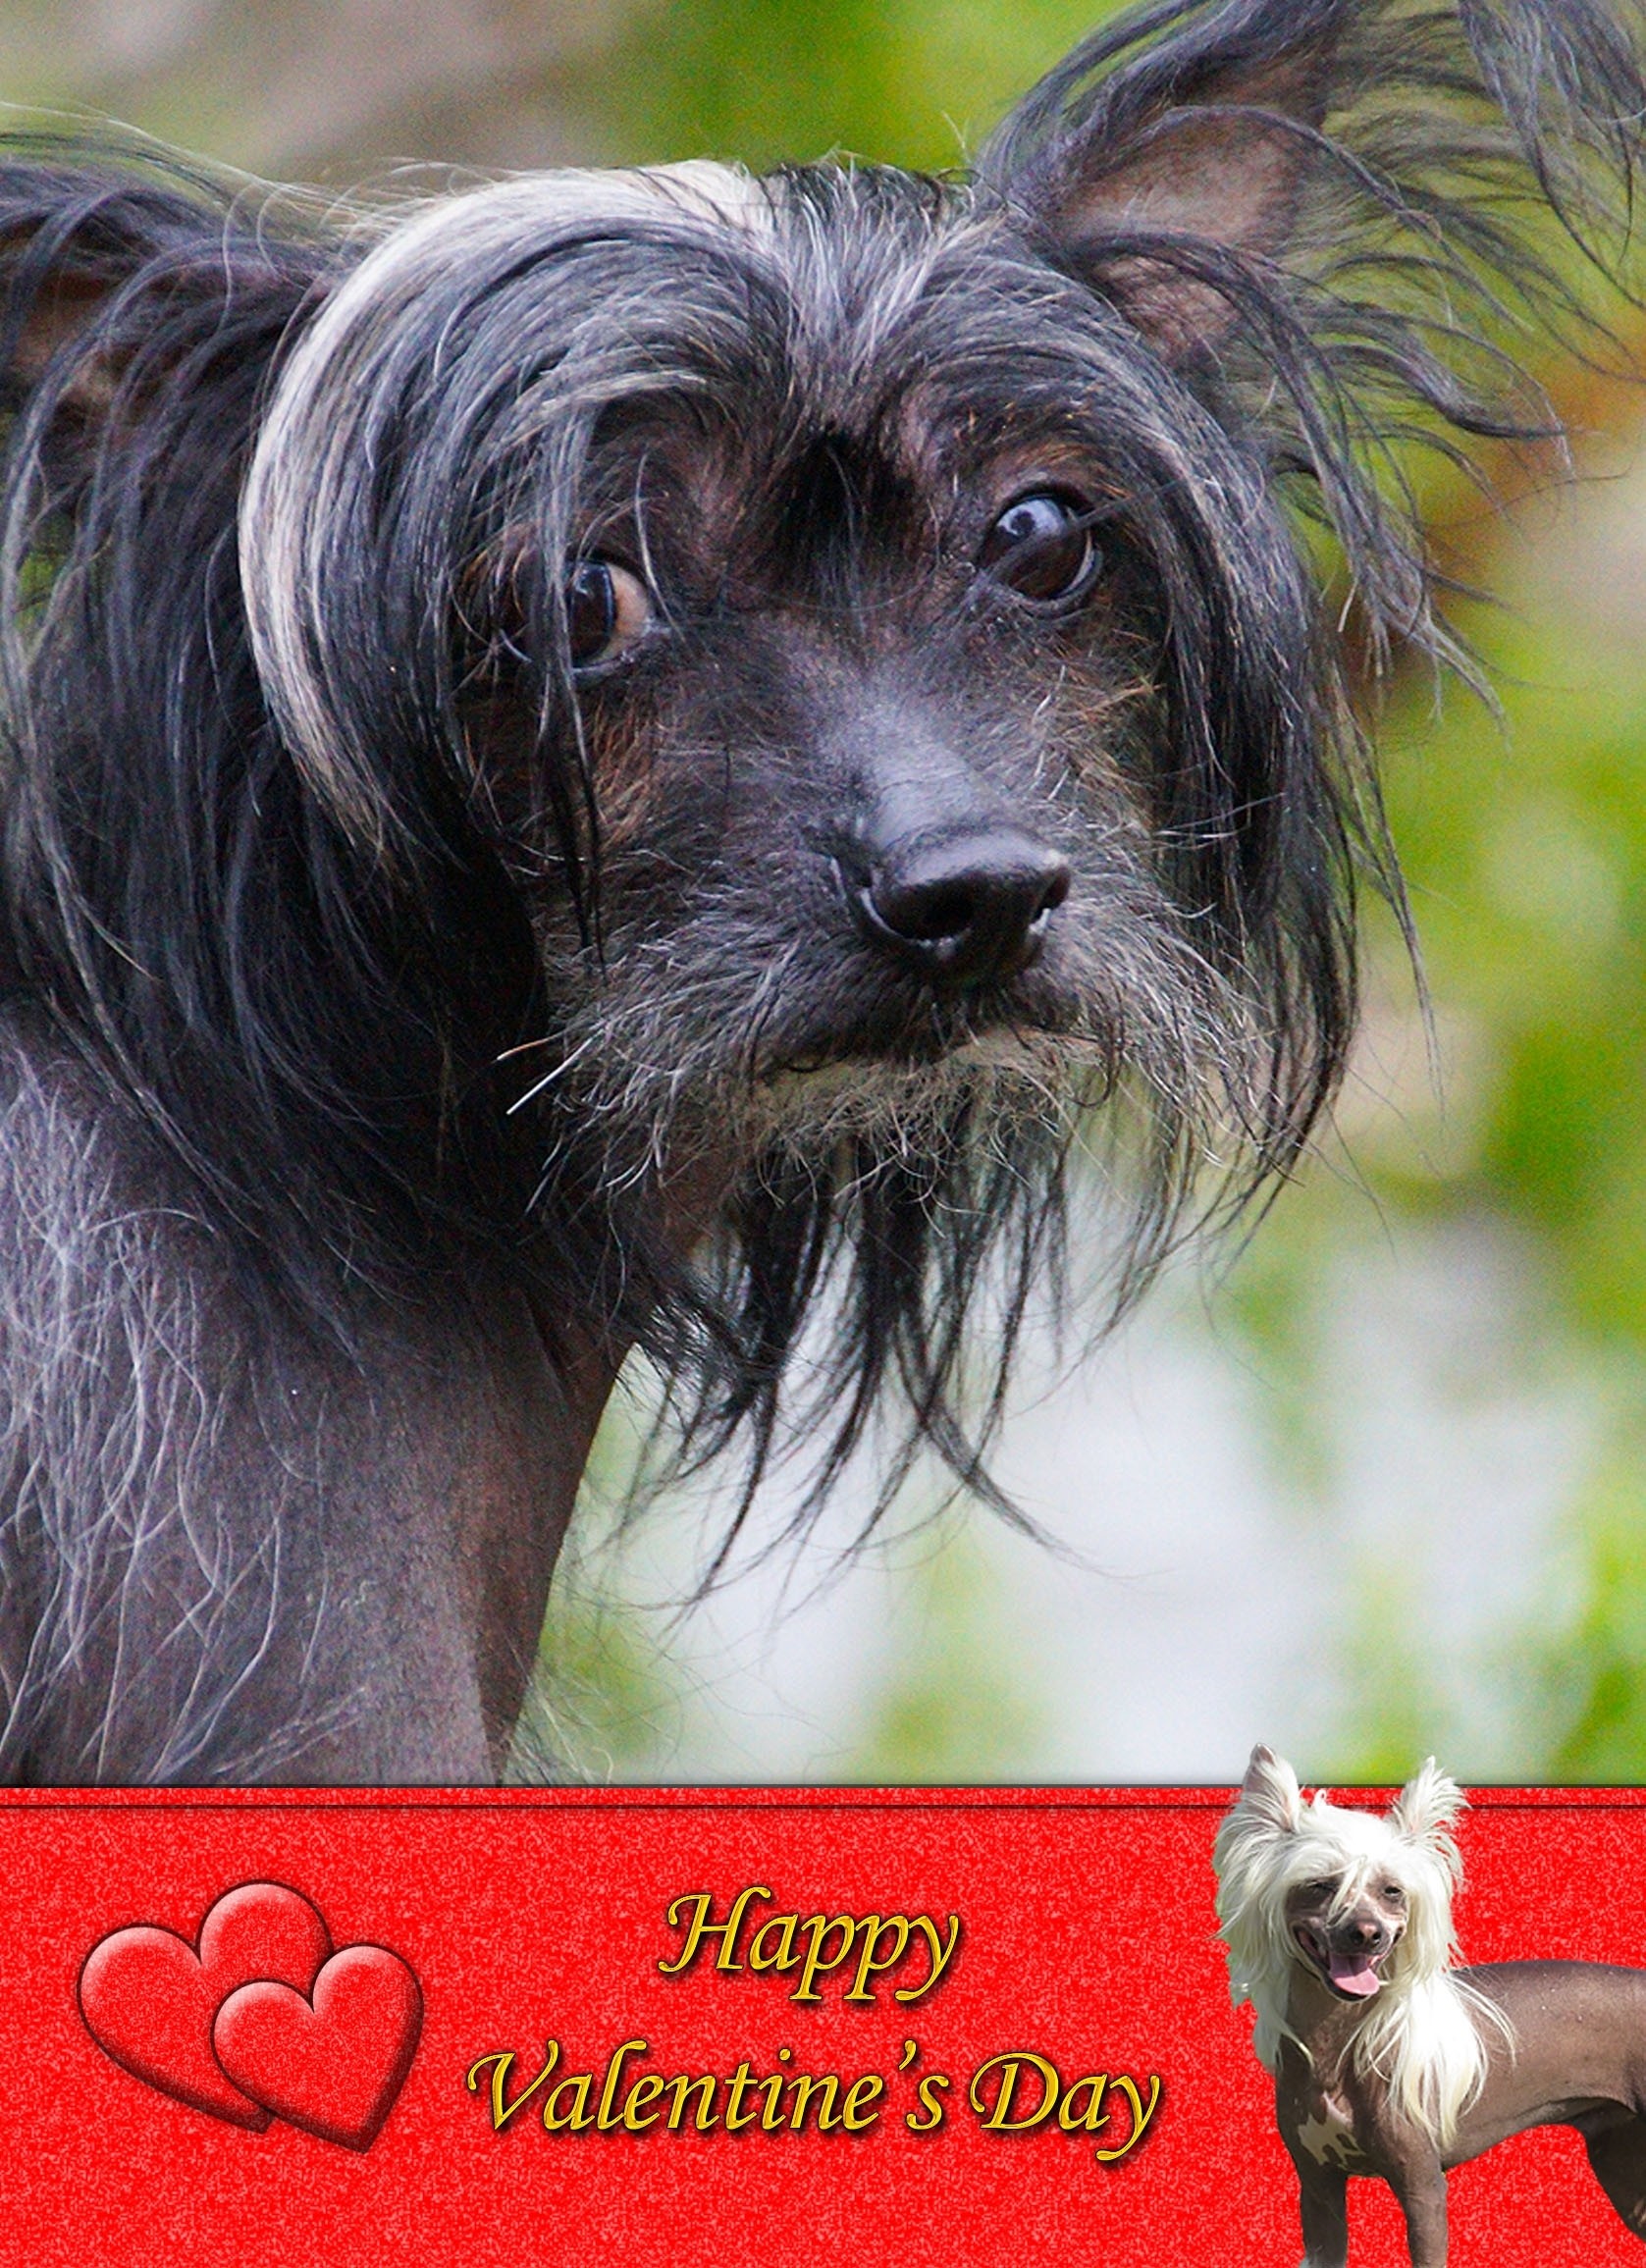 Chinese Crested Valentine's Day Card